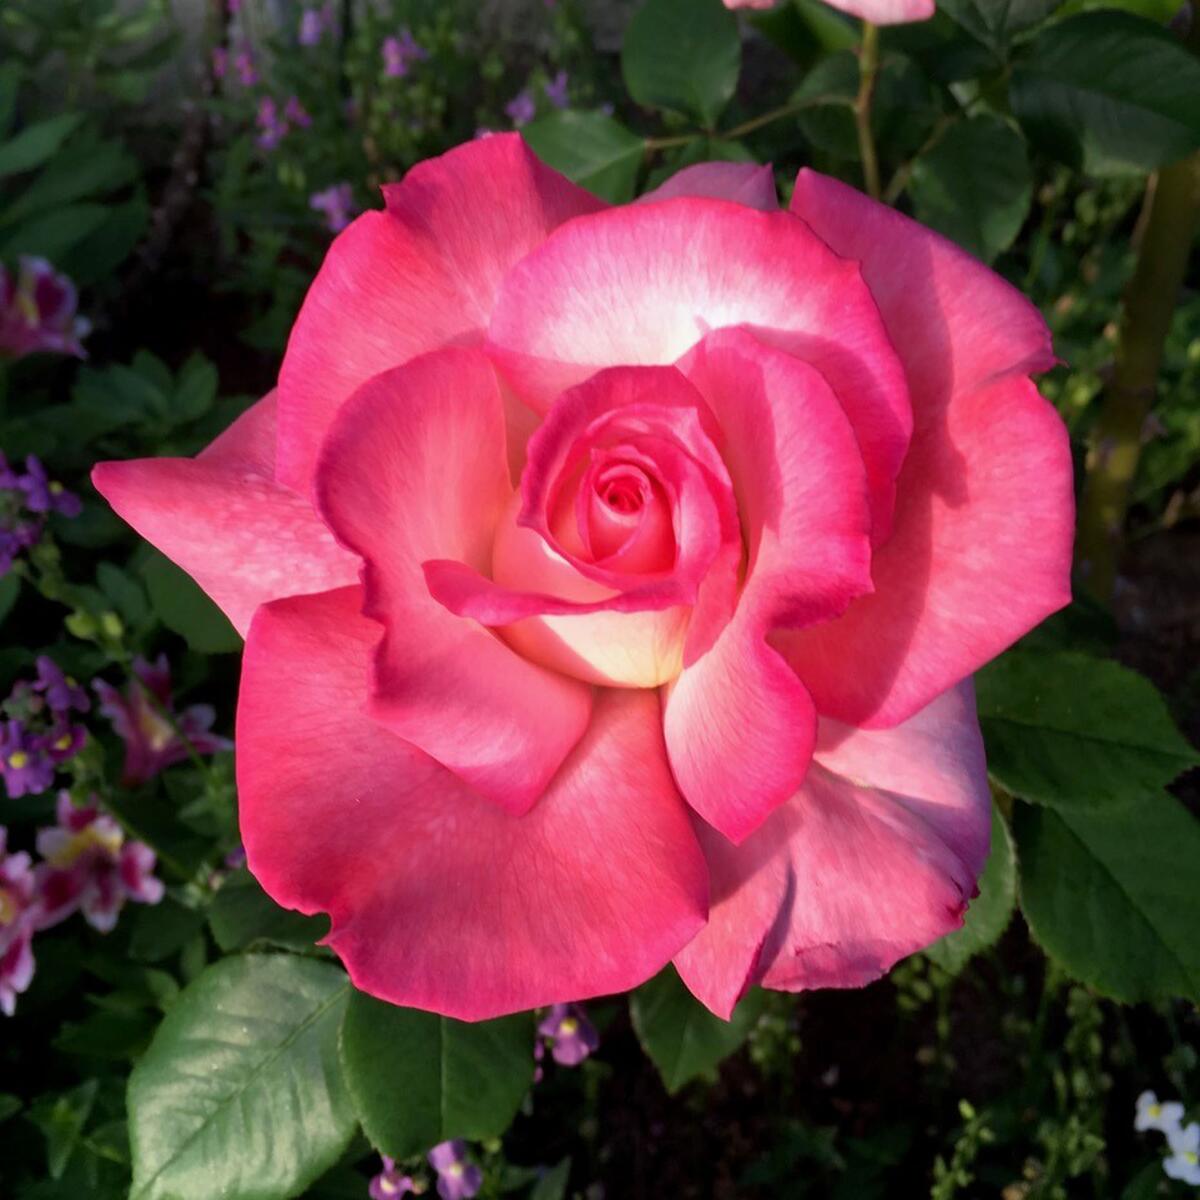 Some information on the historic Peace hybrid tea rose, Lifestyle